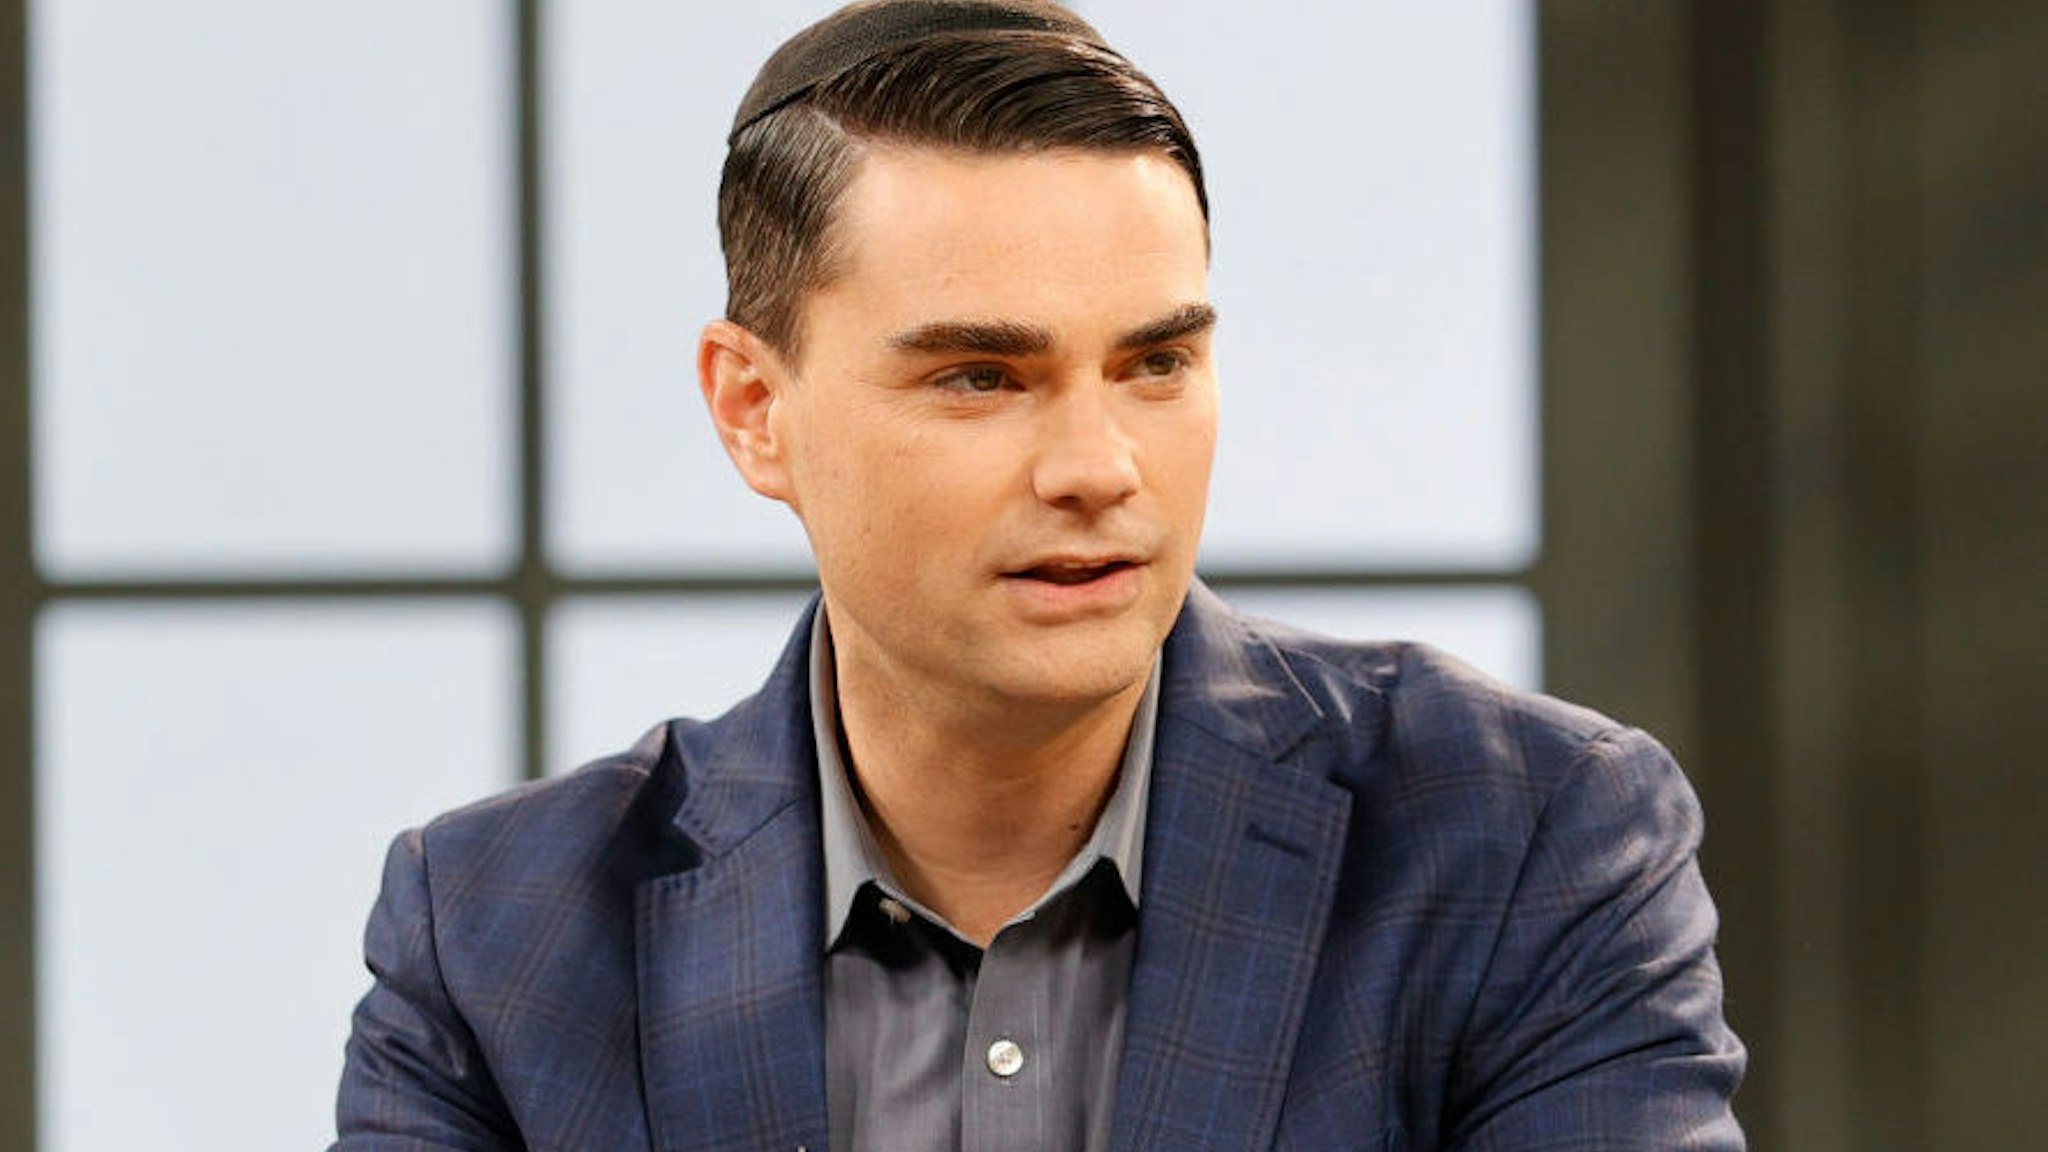 American commentator Ben Shapiro is seen on set during a taping of "Candace" on March 17, 2021 in Nashville, Tennessee.